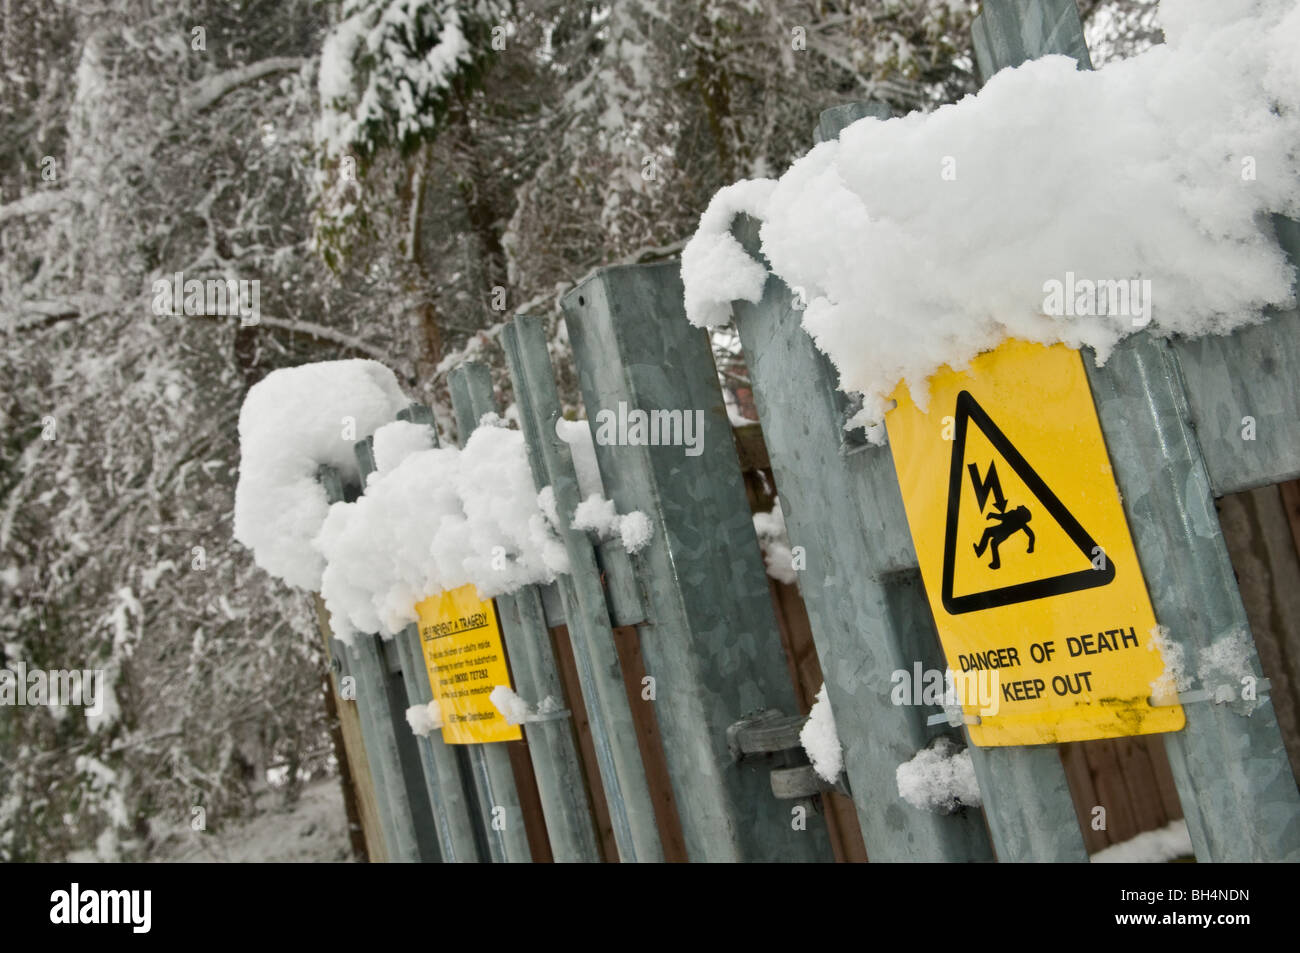 Snow on an Electricity Substation - 'Danger of Death' sign very prominent Stock Photo